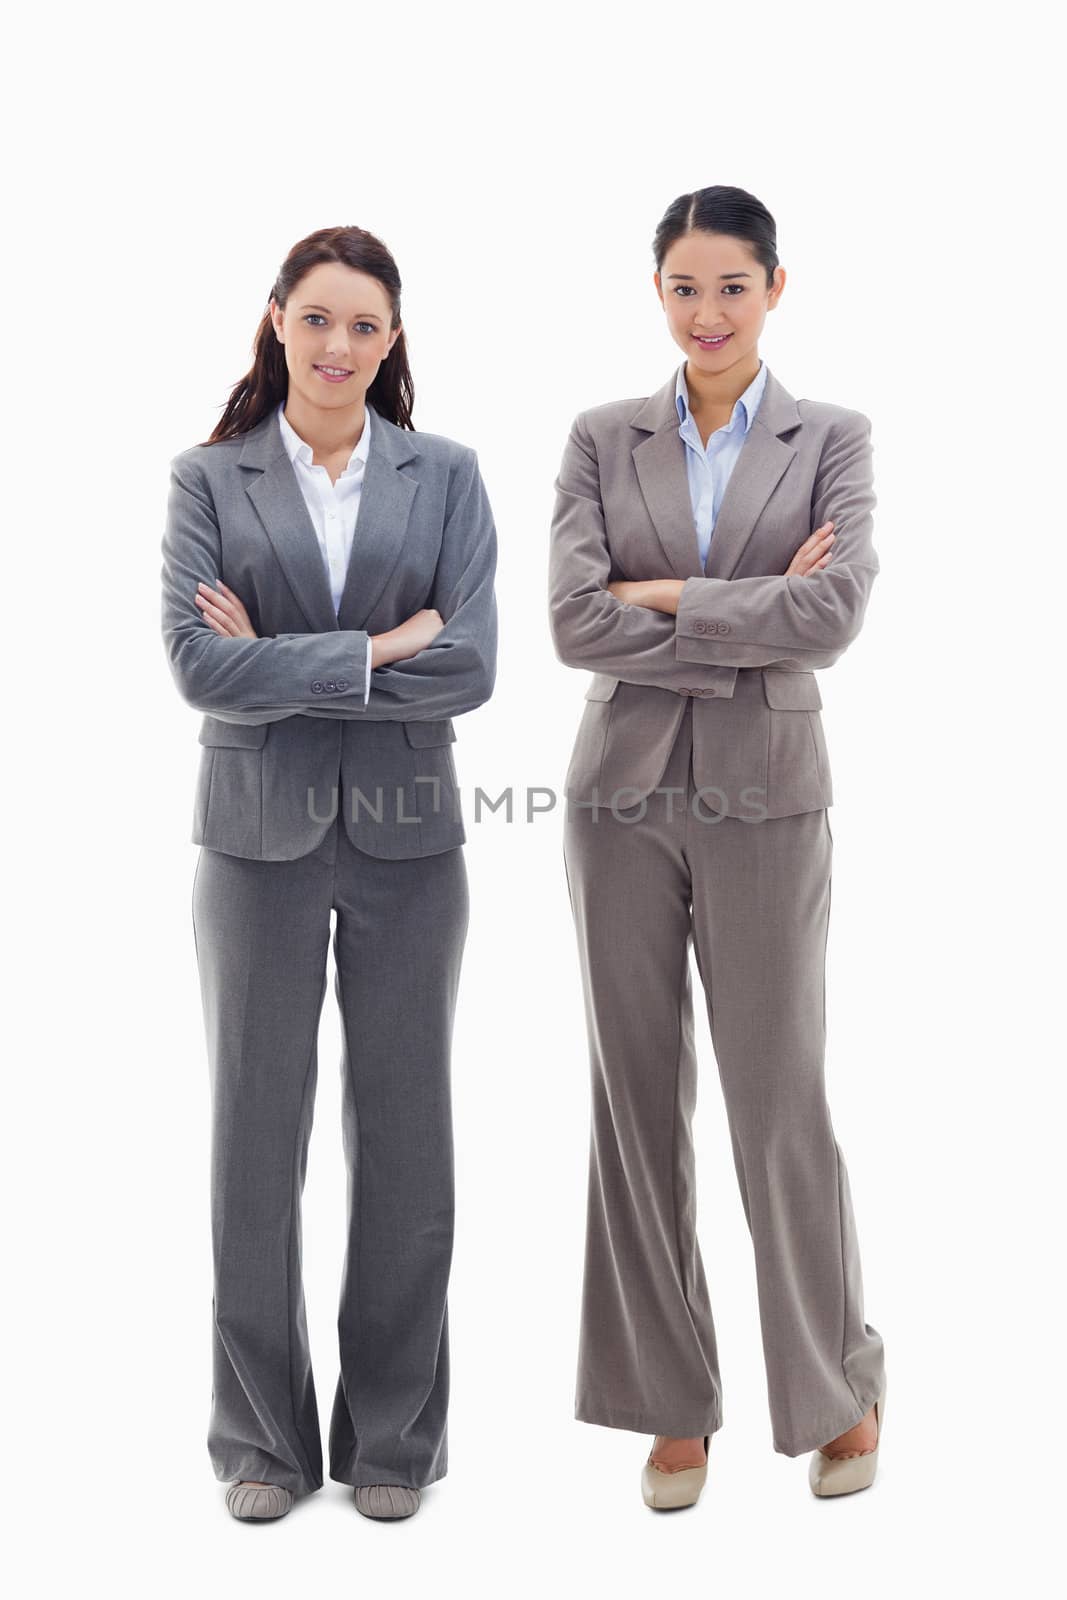 Two businesswomen smiling and crossing their arms against white background